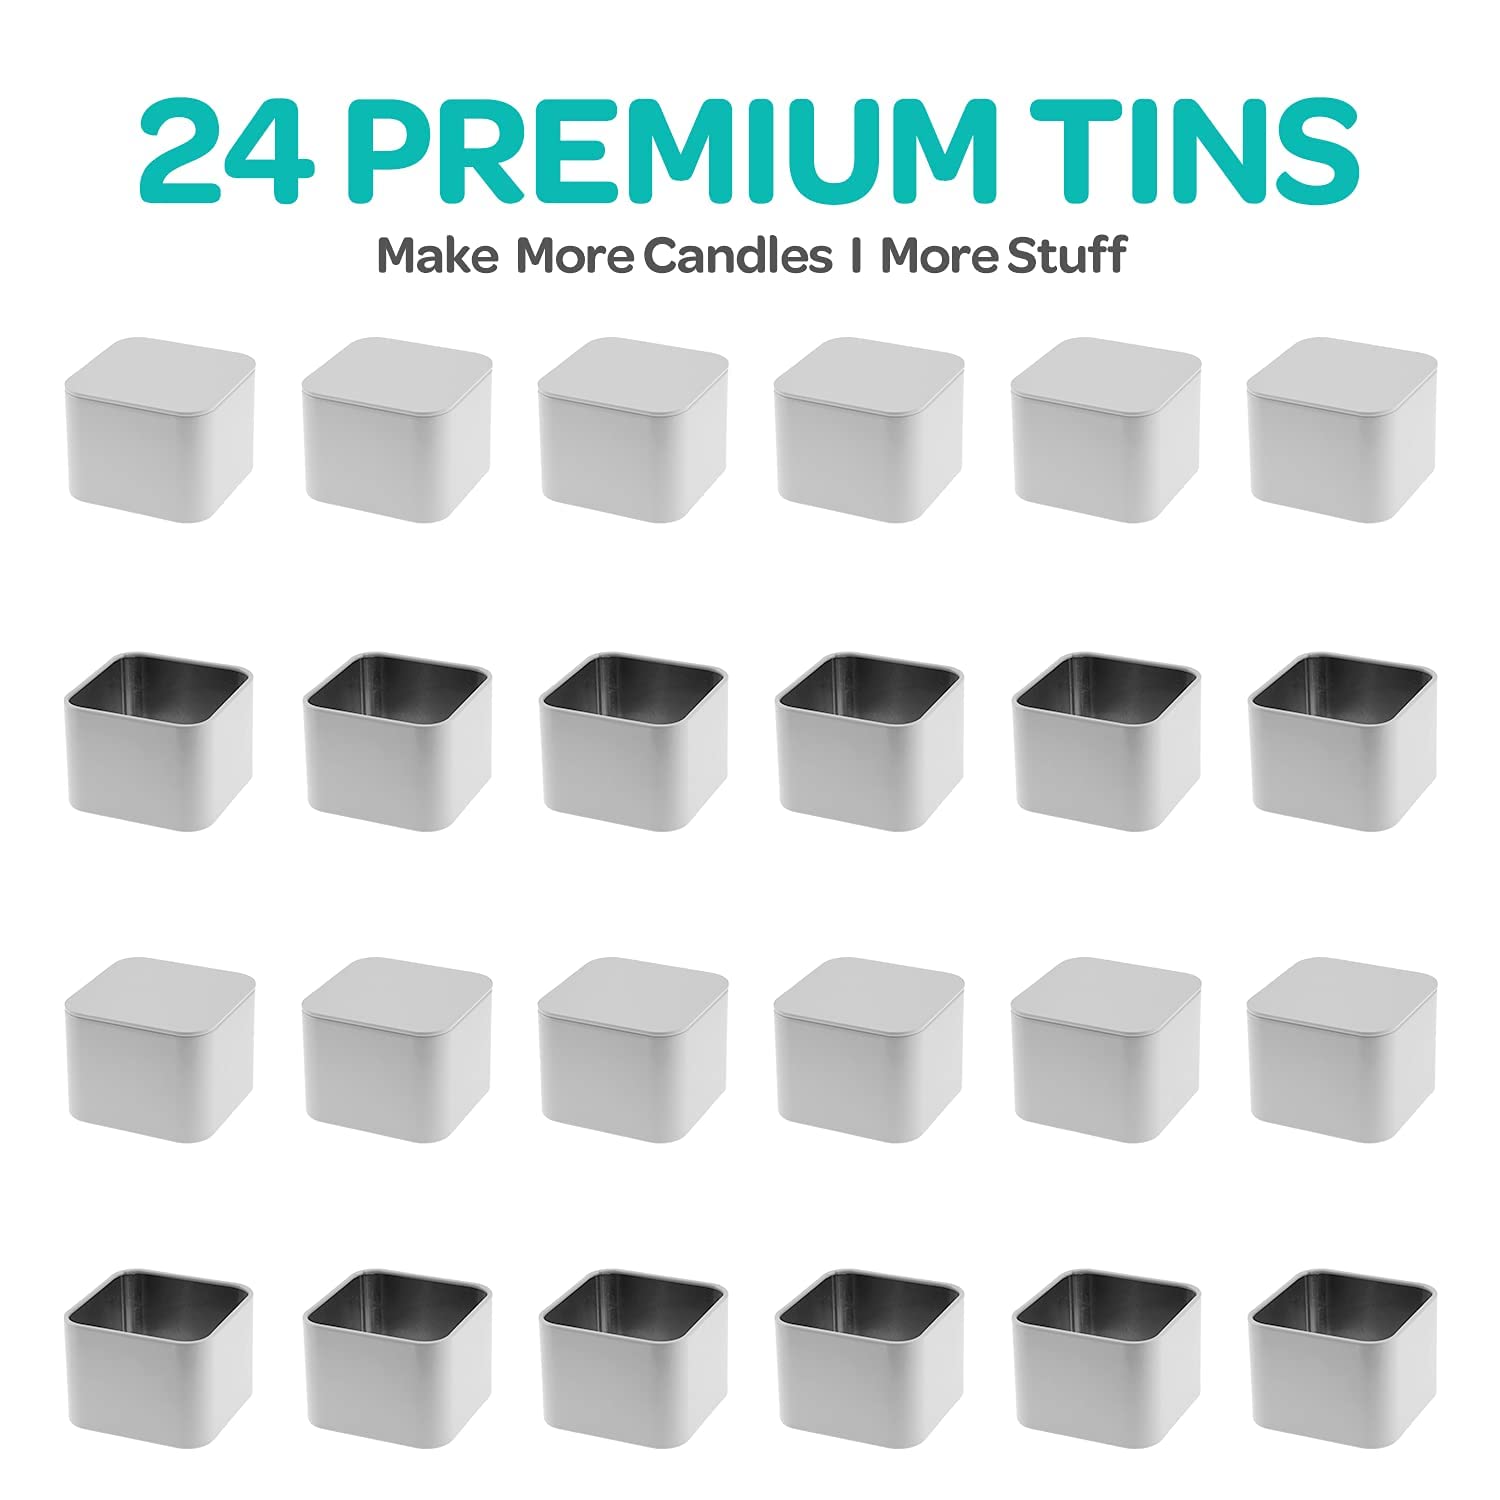 Hearts & Crafts White Square Candle Tins 8 oz with Lids - 24-Pack of Bulk Candle Jars for Making Candles, Arts & Crafts, Storage, Gifts, and More - Empty Candle Jars with Lids  - Like New